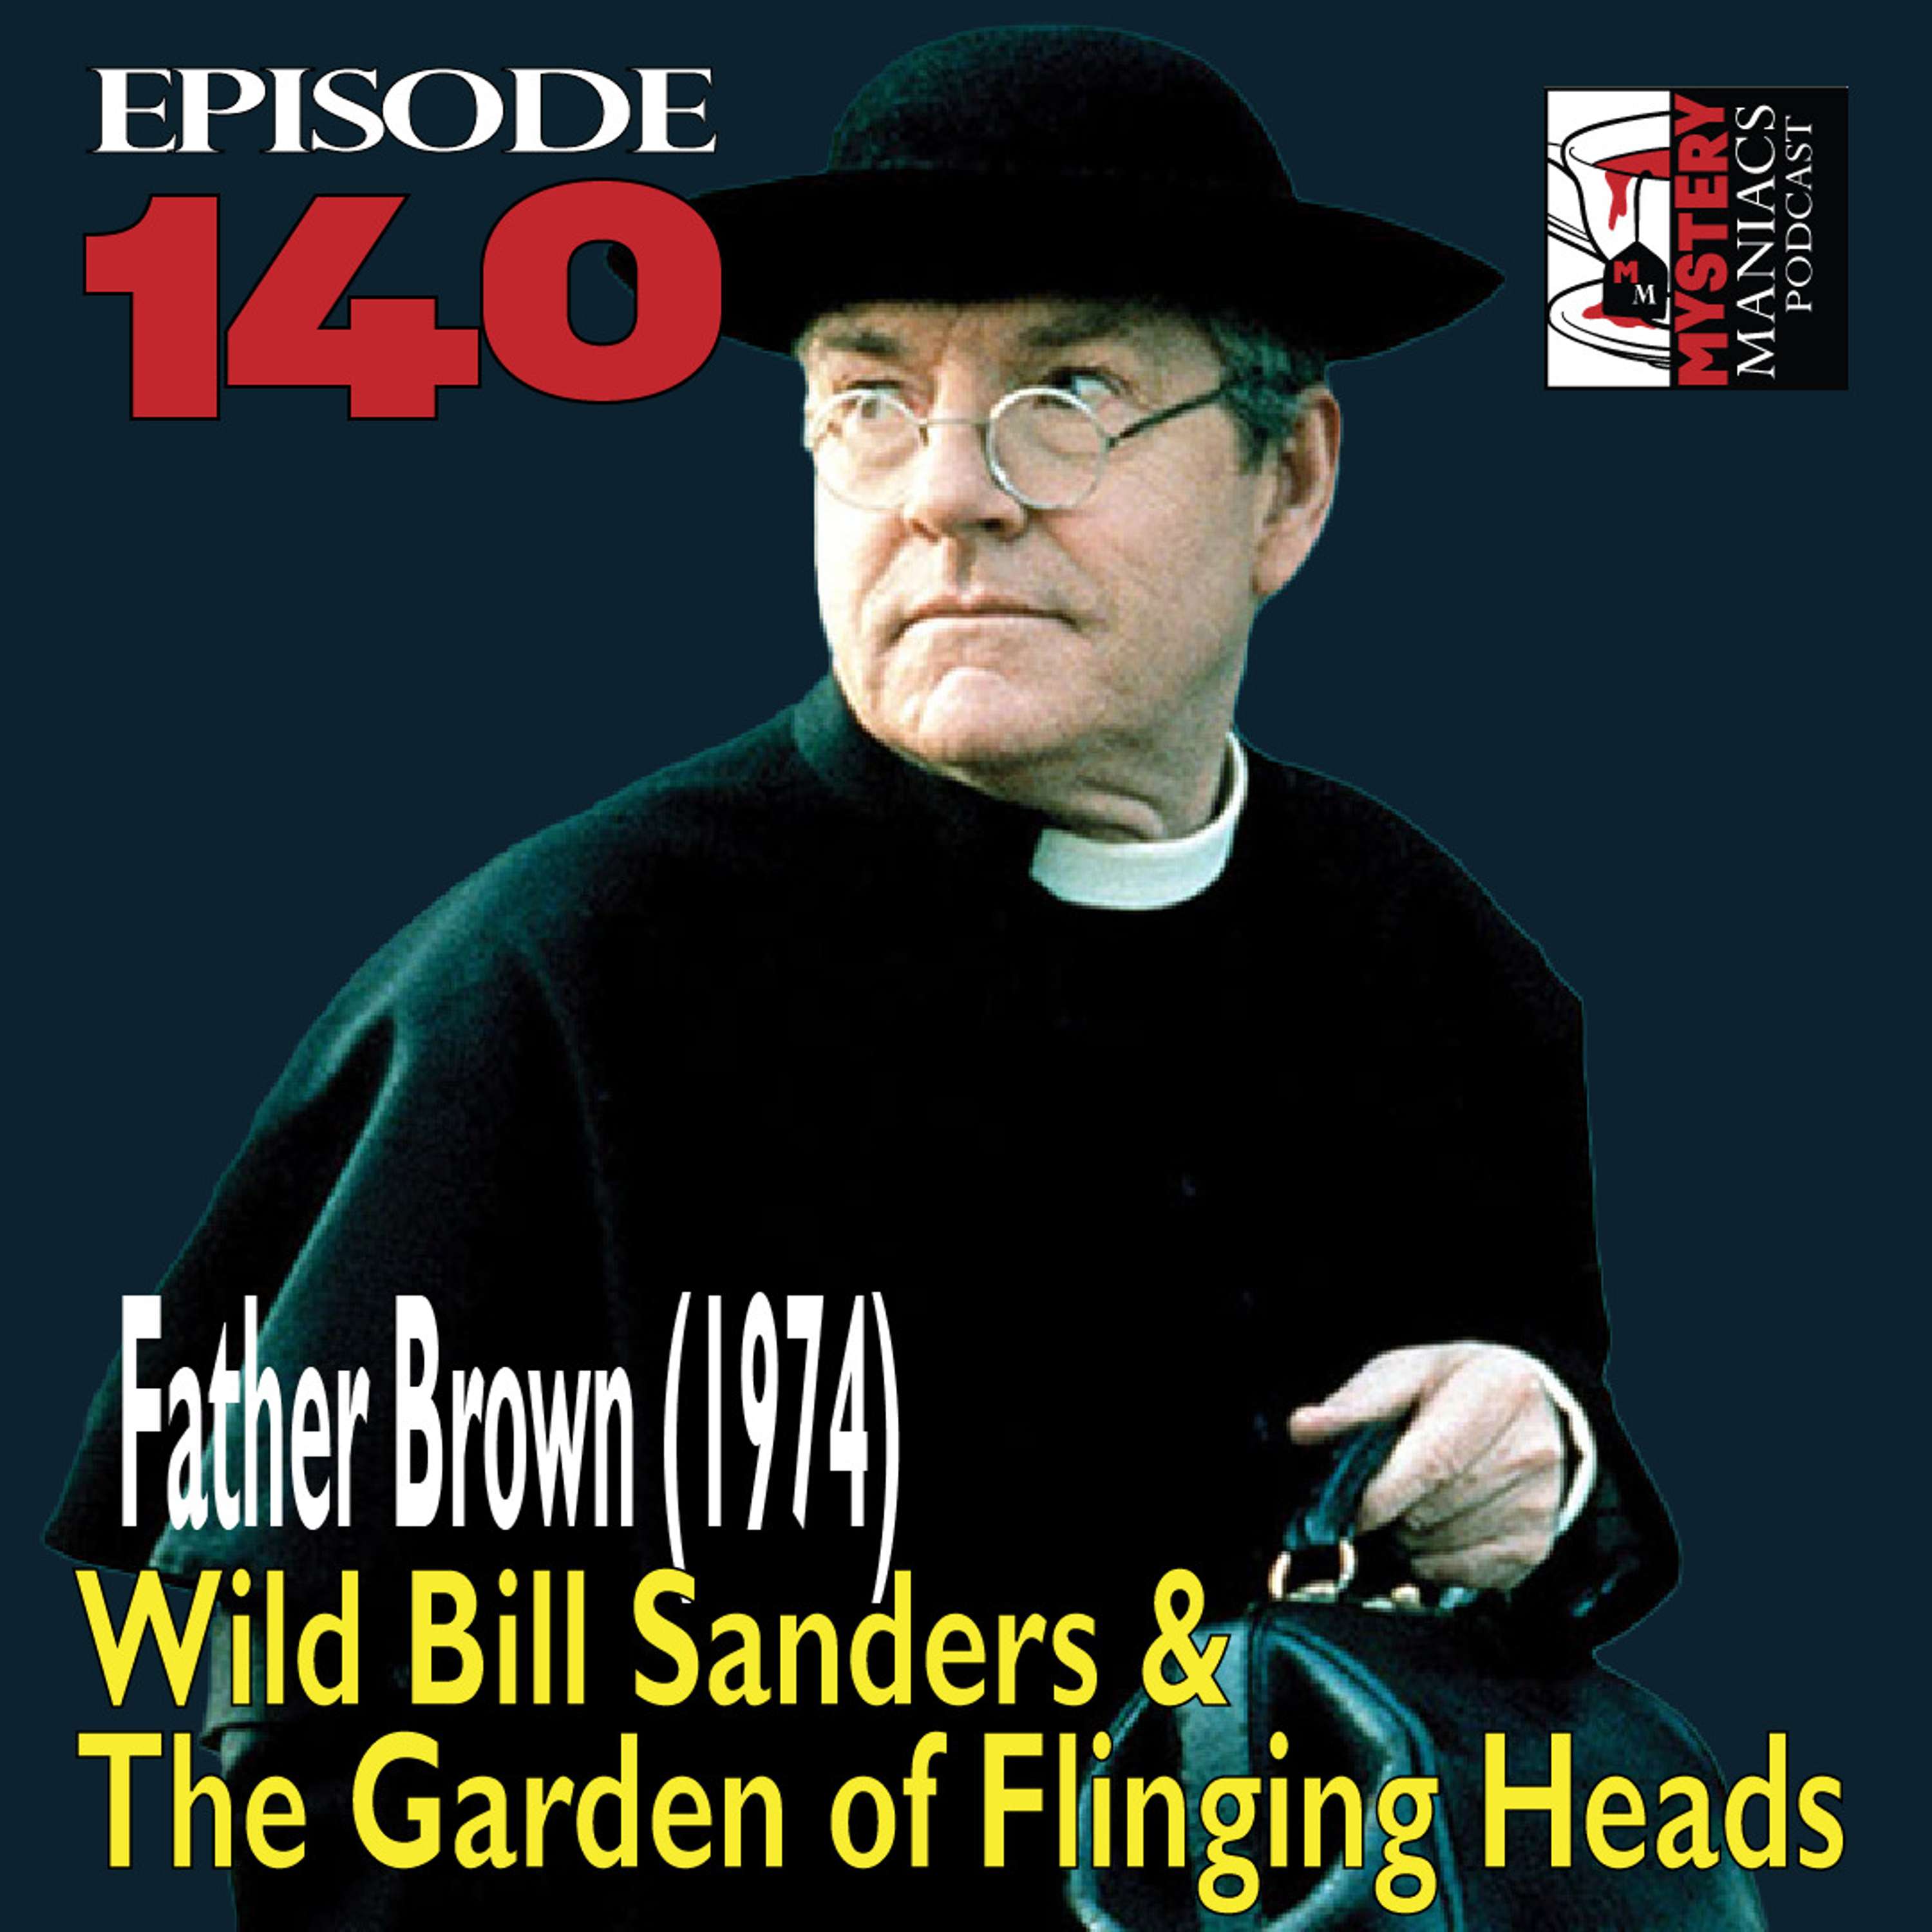 Episode 140 - Mystery Maniacs - Father Brown(1974) - Wild Bill Sanders & The Garden of Flinging Heads